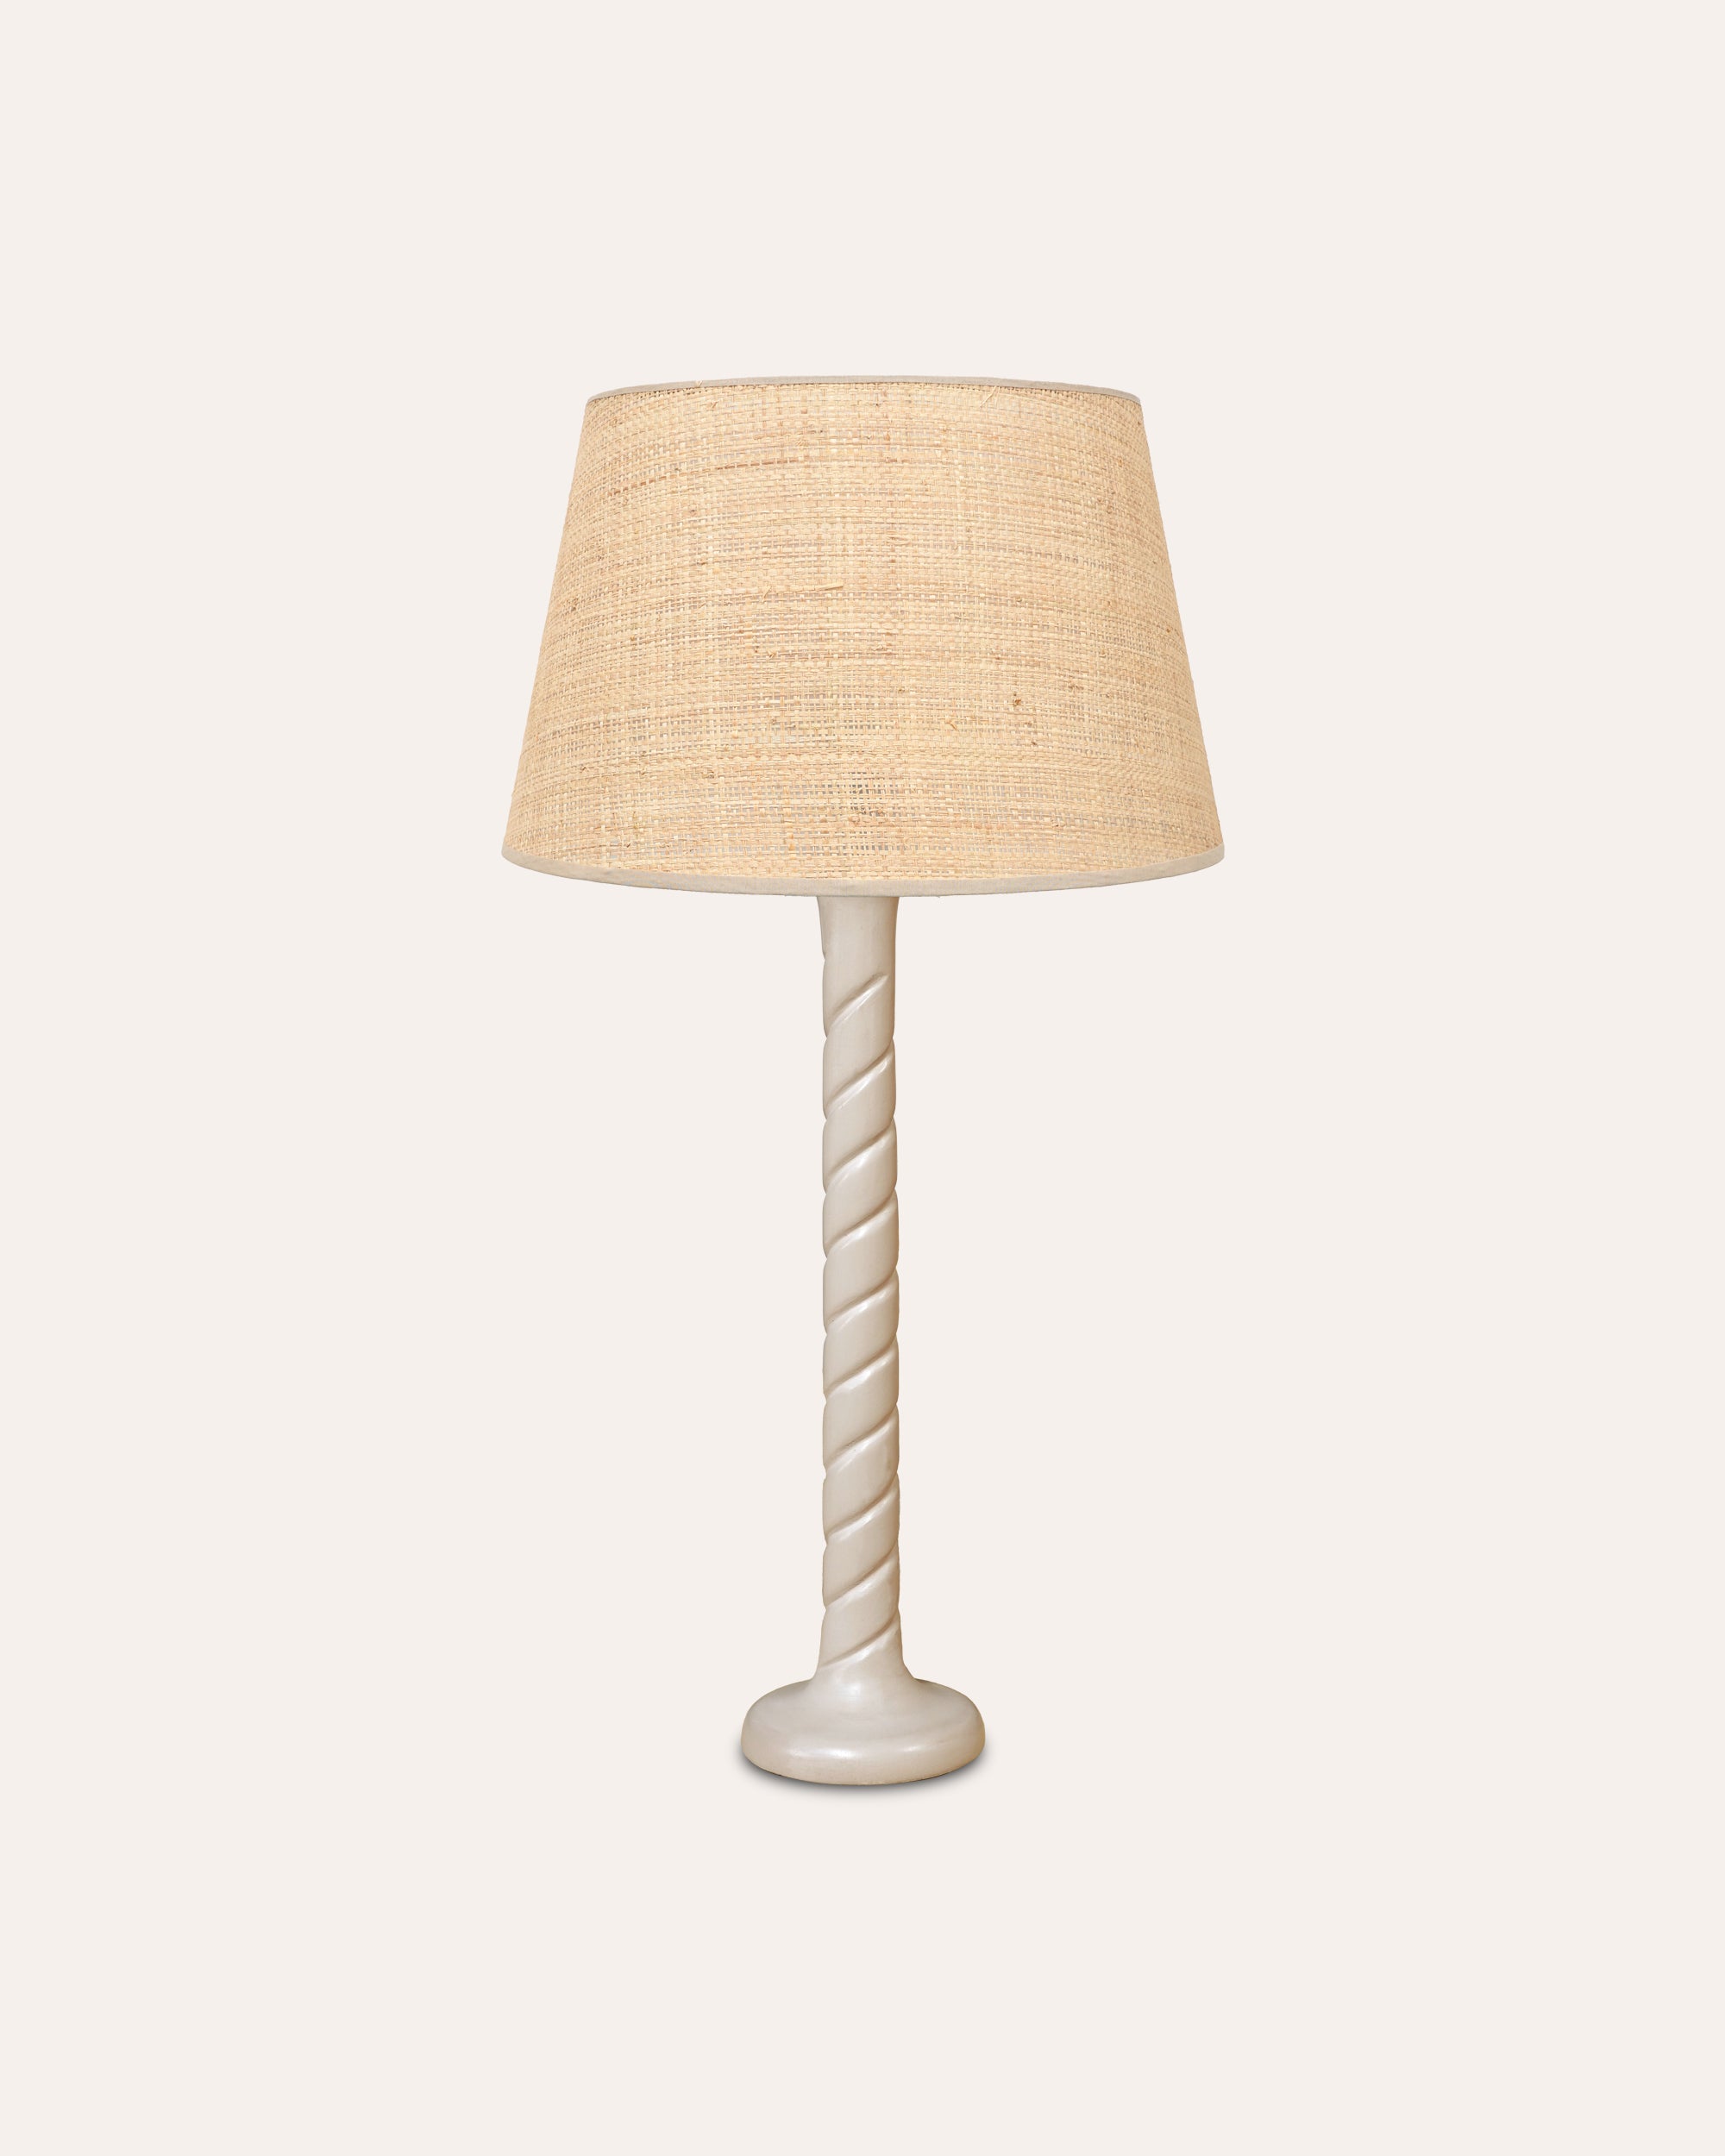 Large Twisted Wooden Table Lamp - Taupe